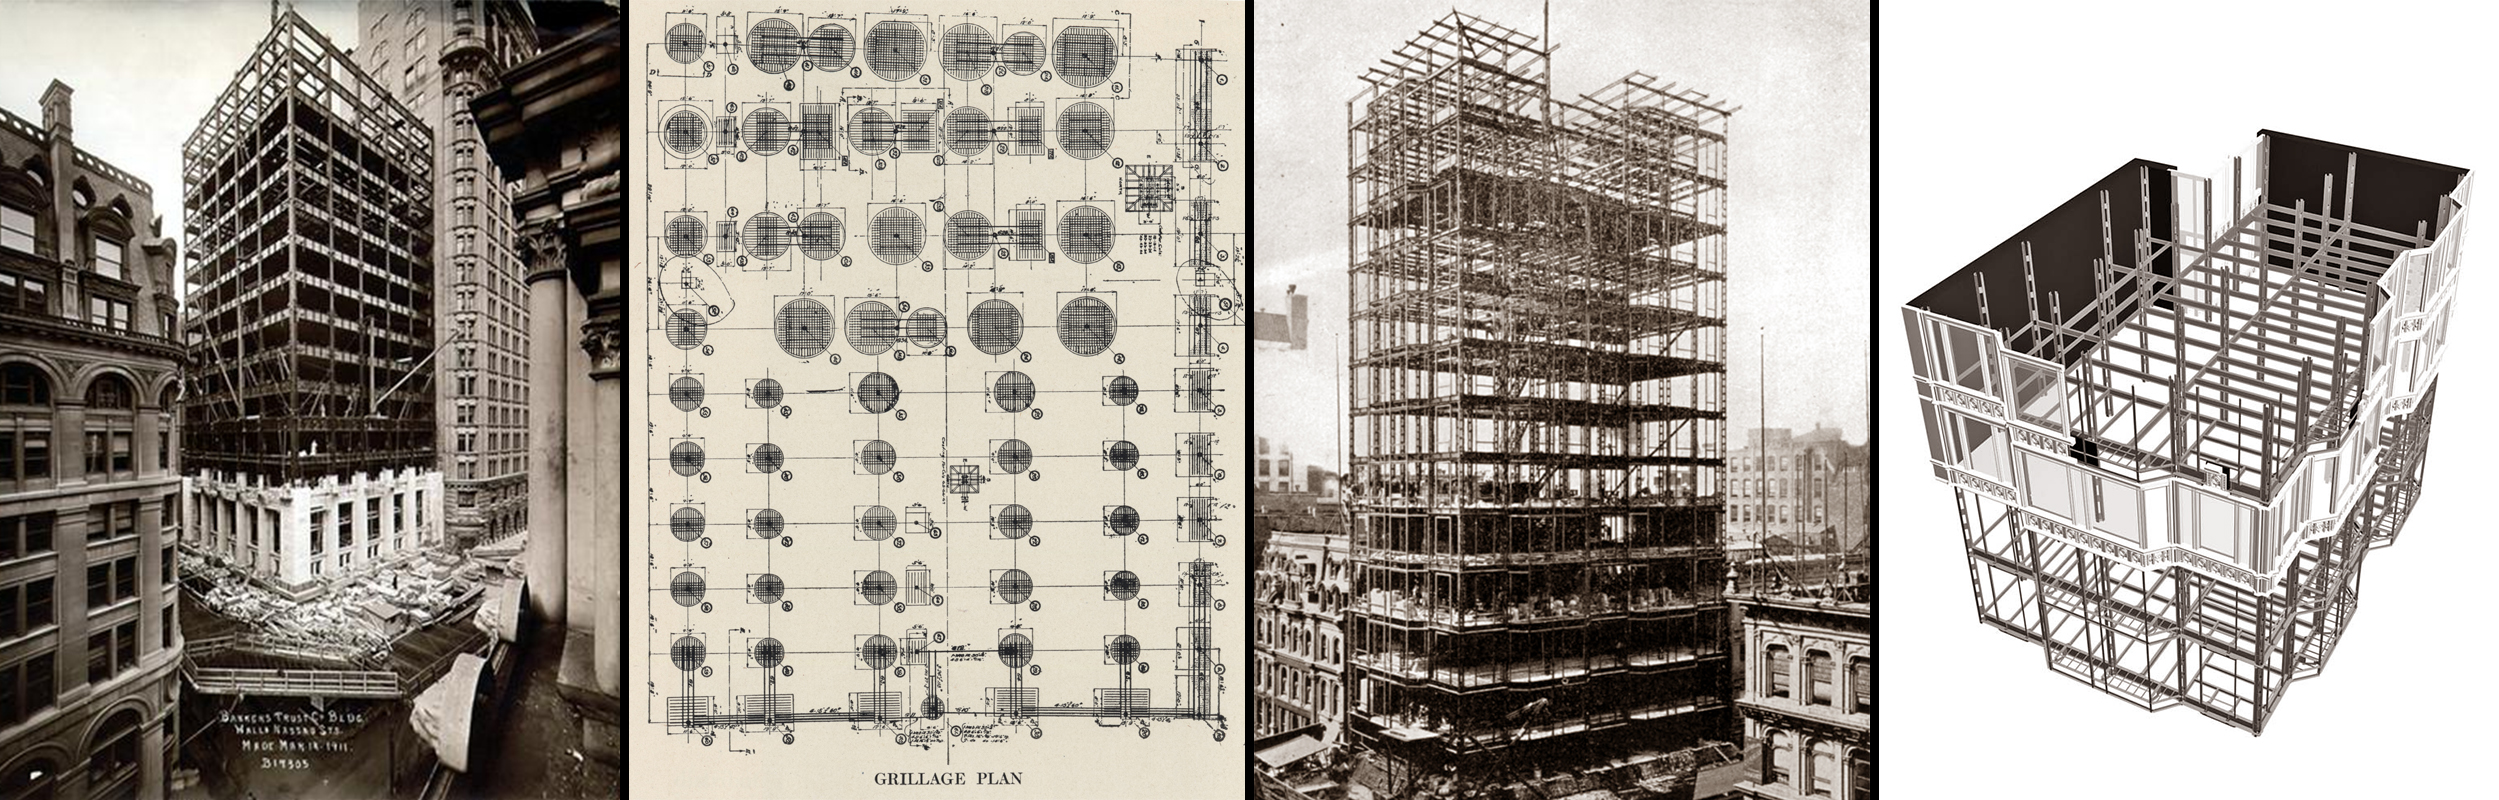 Left to right: 1) Bankers Trust Building construction, March 14, 1911. The Skyscraper Museum #B17305. 2) Plan of the Woolworth Building Foundation. Reproduced from American Architect, 103, March 26, 1913. 3) Reliance Building, State and Washington Sts., Chicago. Burnham and Root/D.H. Burnham & Co., 1891-1895. Construction view showing steel framing. 4) Reliance Building, Chicago, 1891-95. Digital reconstruction by Ryan Risse from Chicago Skyscrapers 1871-1934